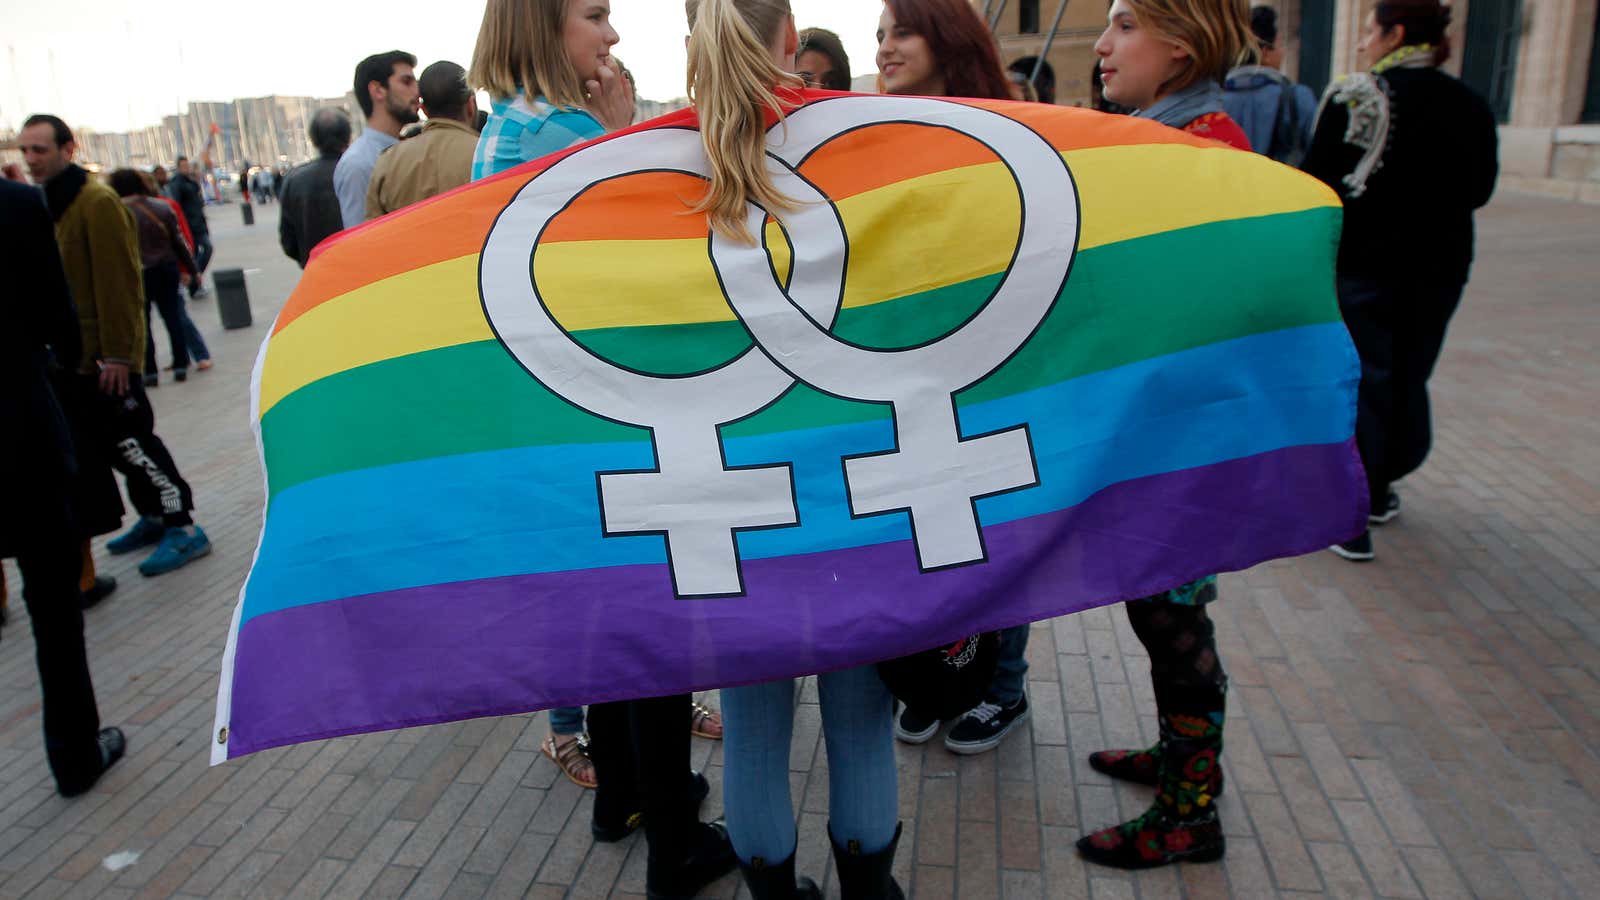 Gay women in France may soon have another milestone to celebrate.